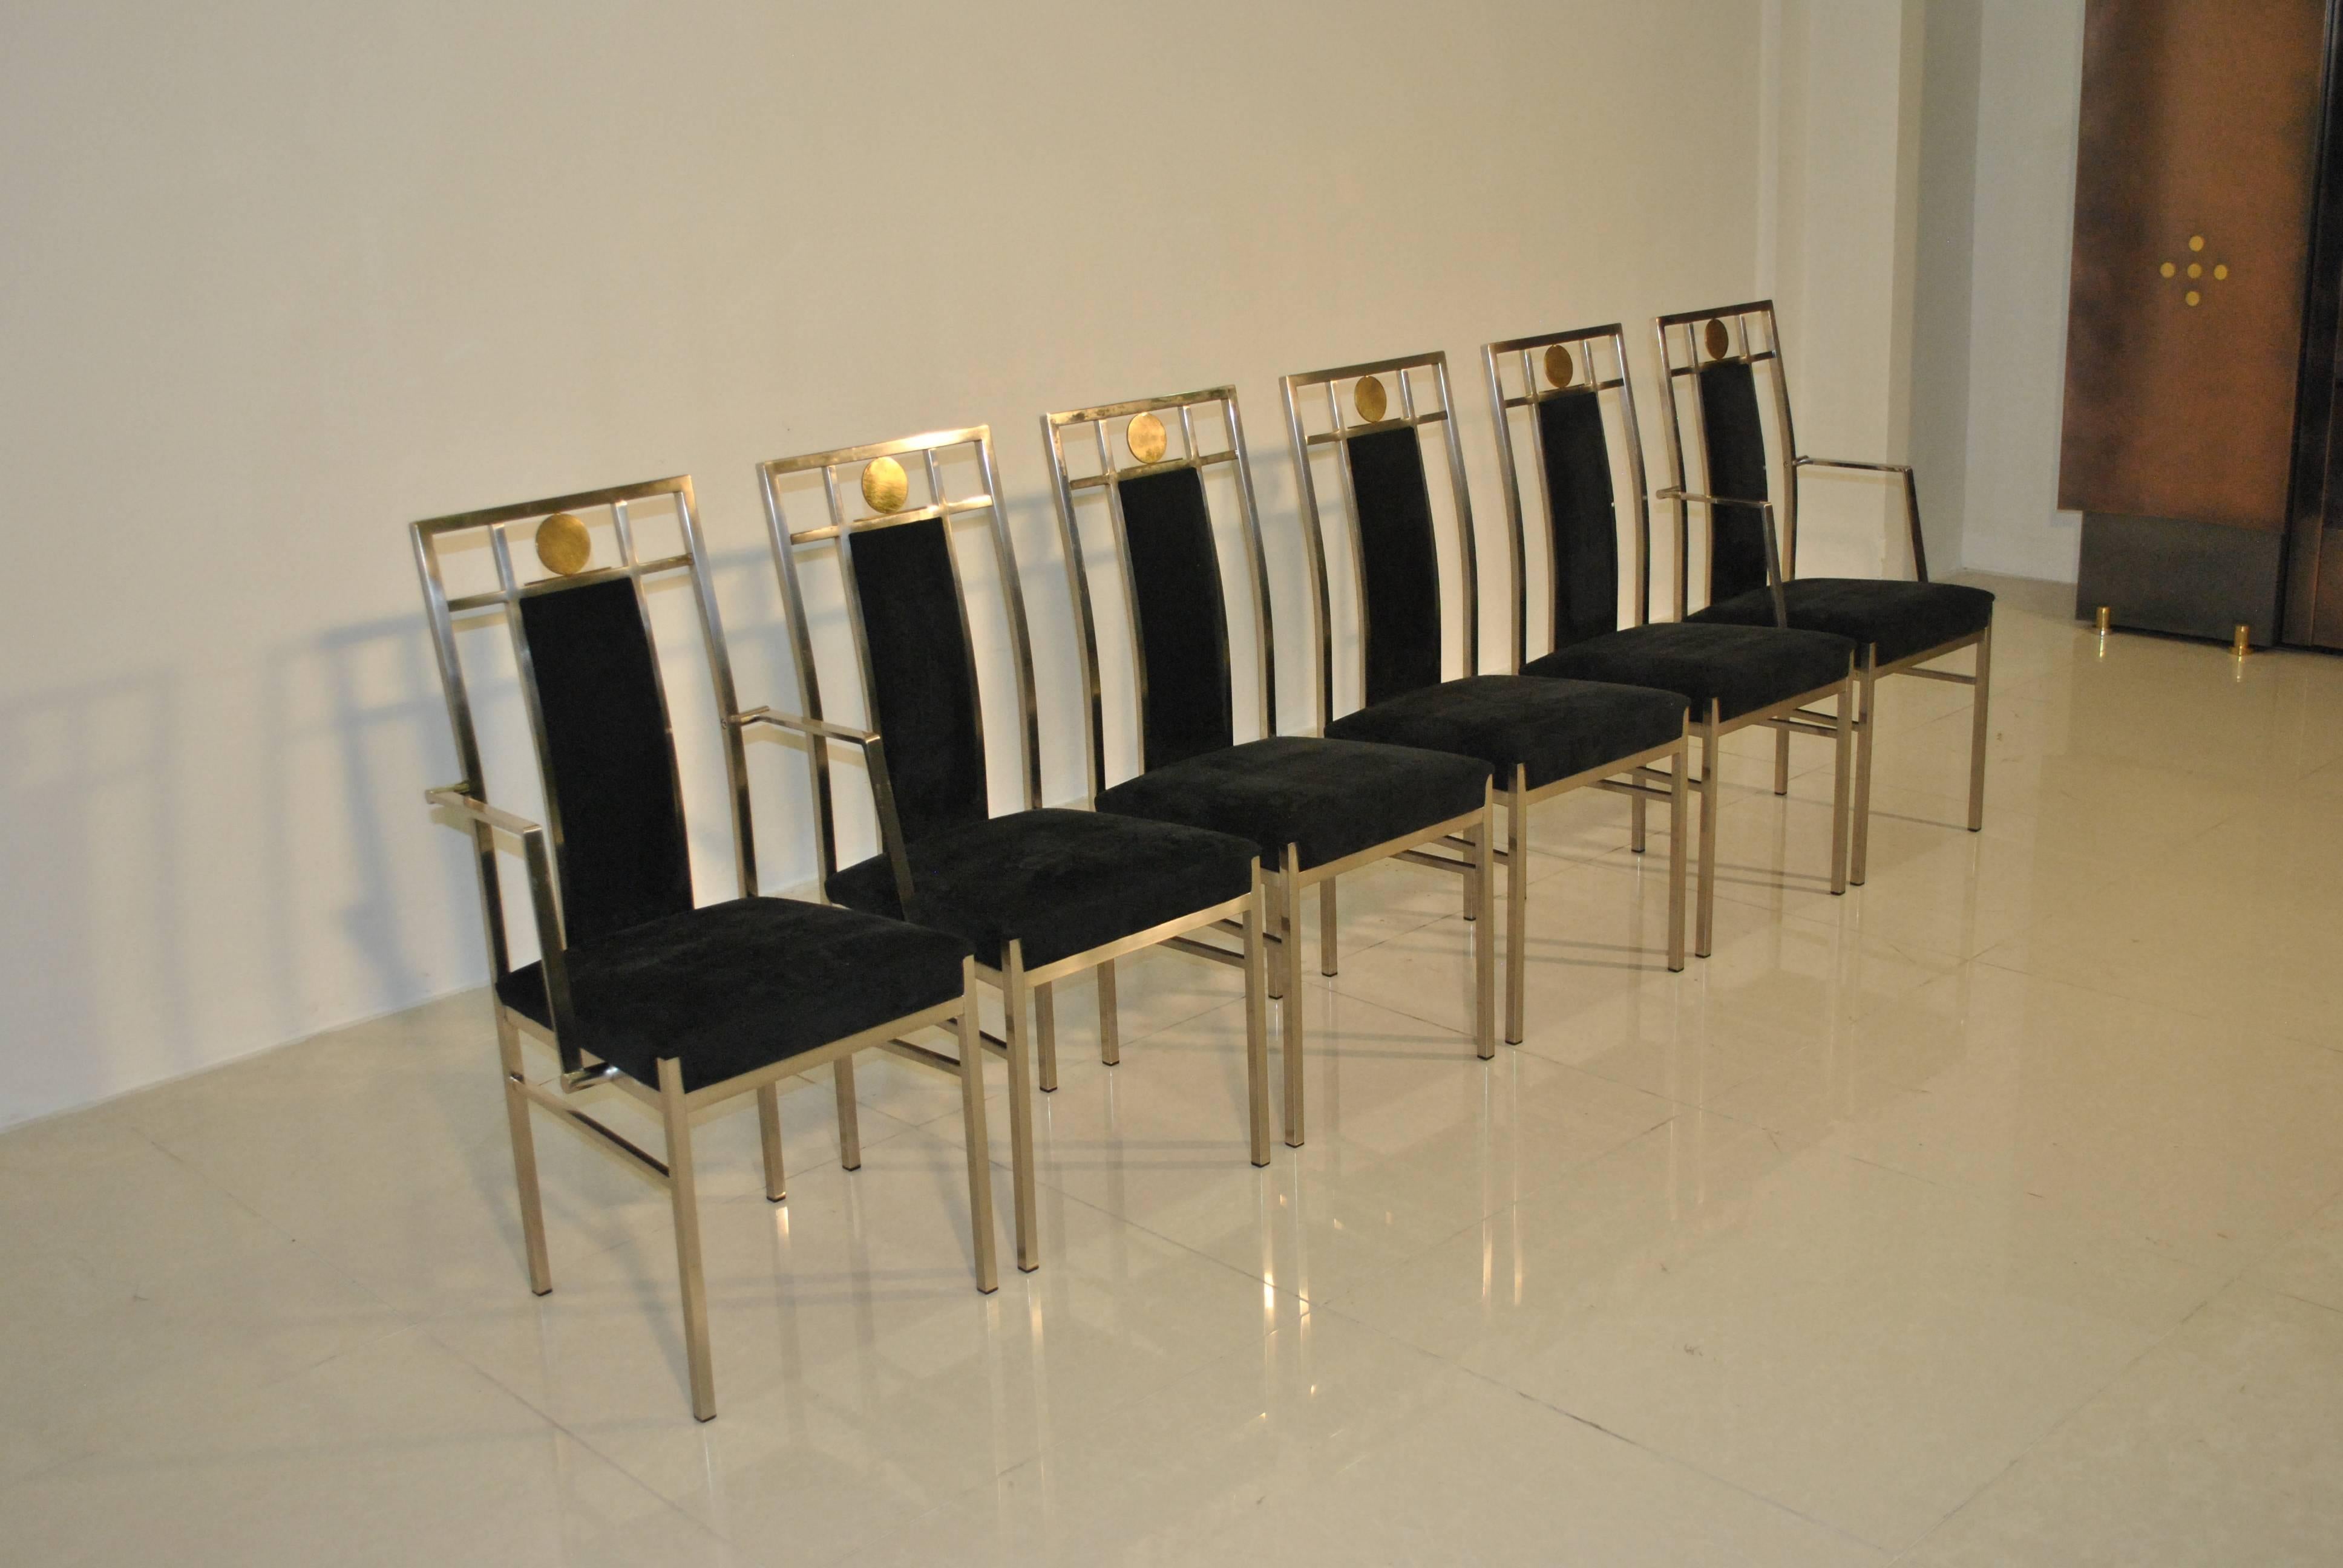 Six beautiful dining chairs in steel, brass and black fabric by Belgo Chrome. Modern and neoclassical look that matches Maison Jansen and Hollywood Regency pieces.
Two chairs have arm rests.

We have the matching pieces like tables and a